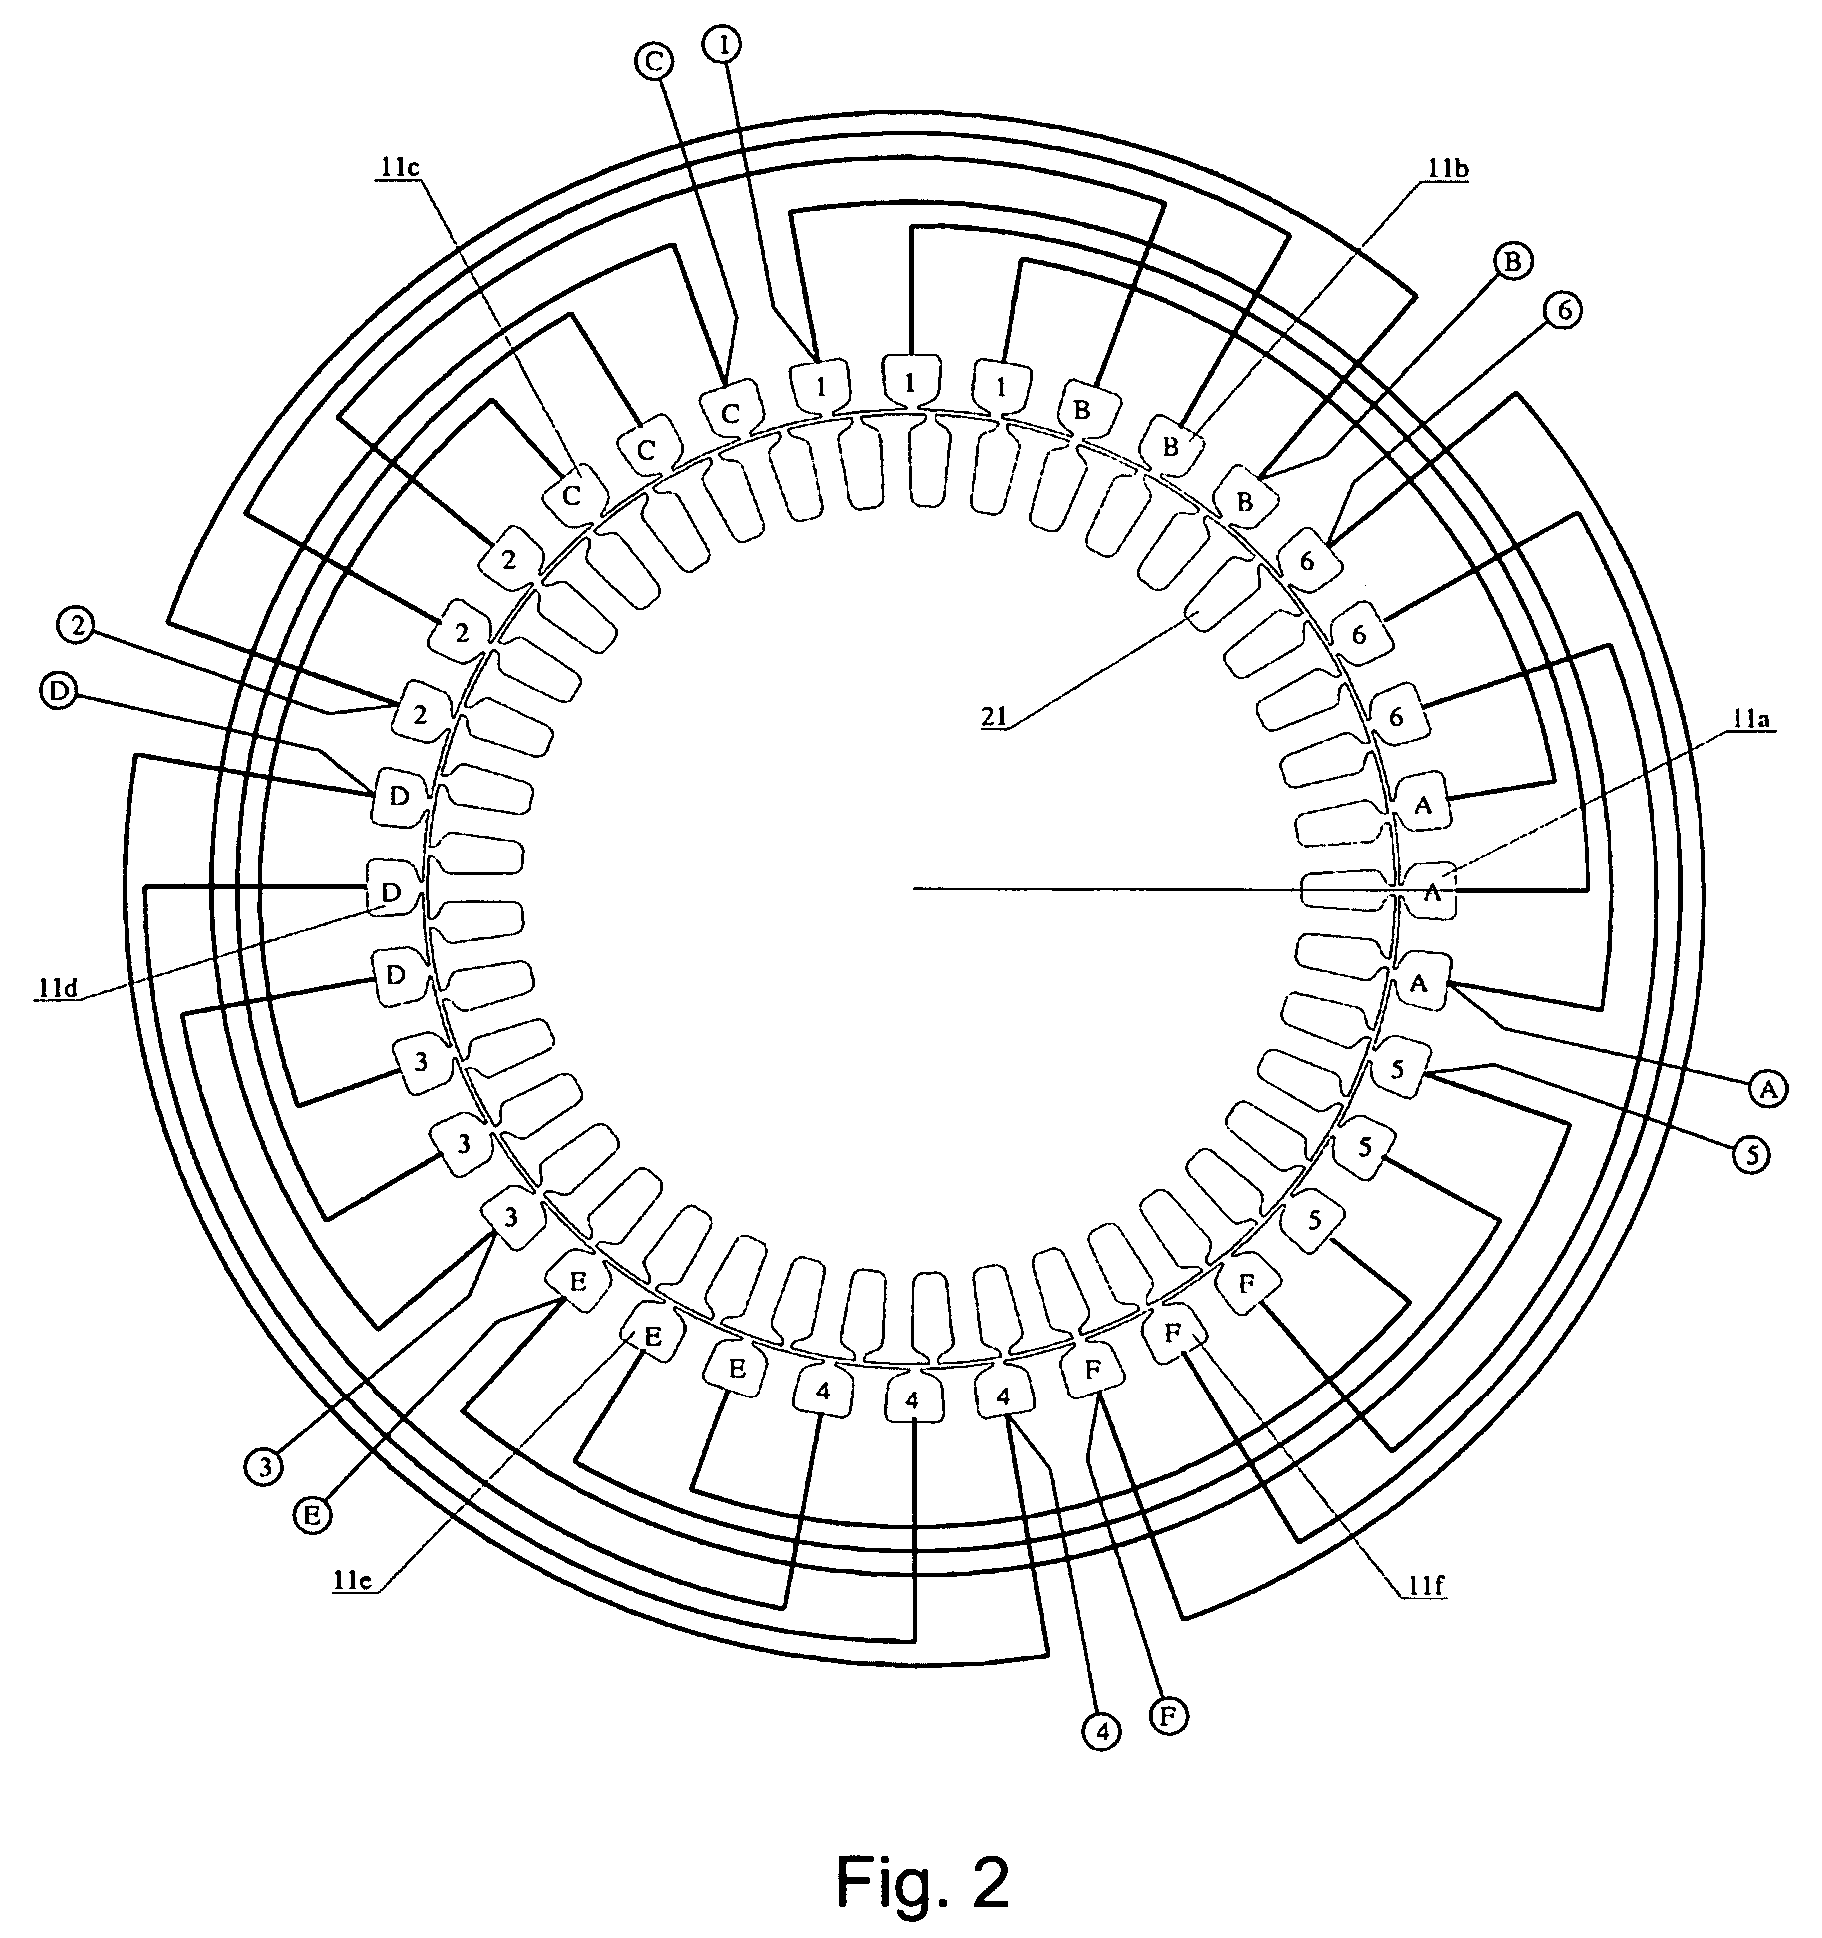 Induction motor with integrated sensor